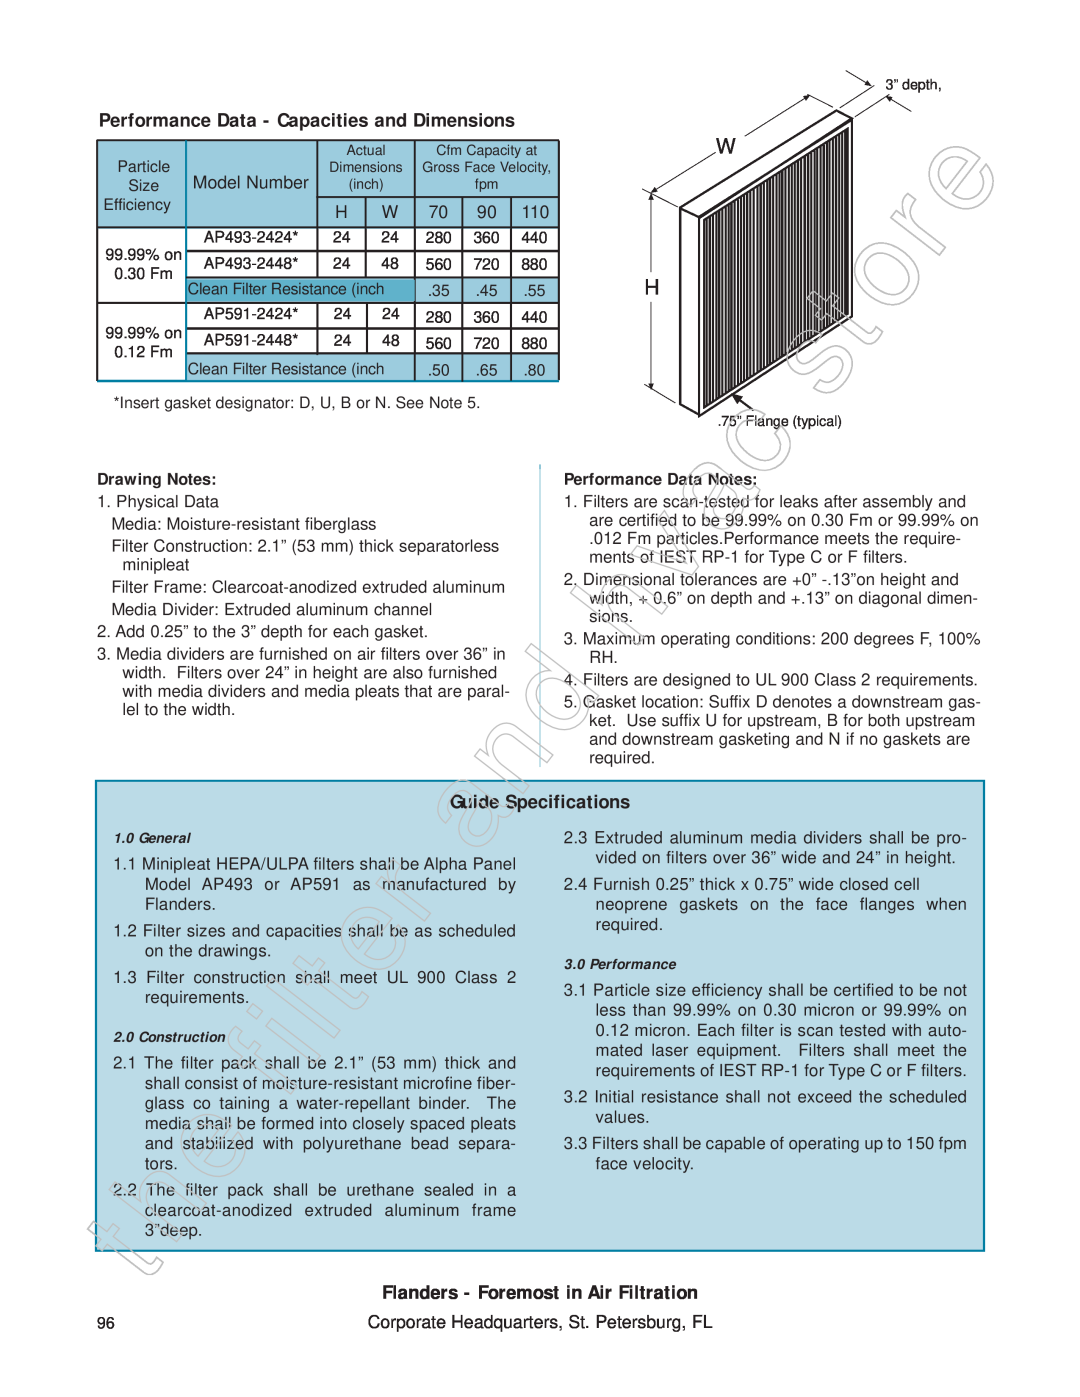 Honeywell 11255 Performance Data - Capacities and Dimensions, Guide Specifications, Flanders - Foremost in Air Filtration 